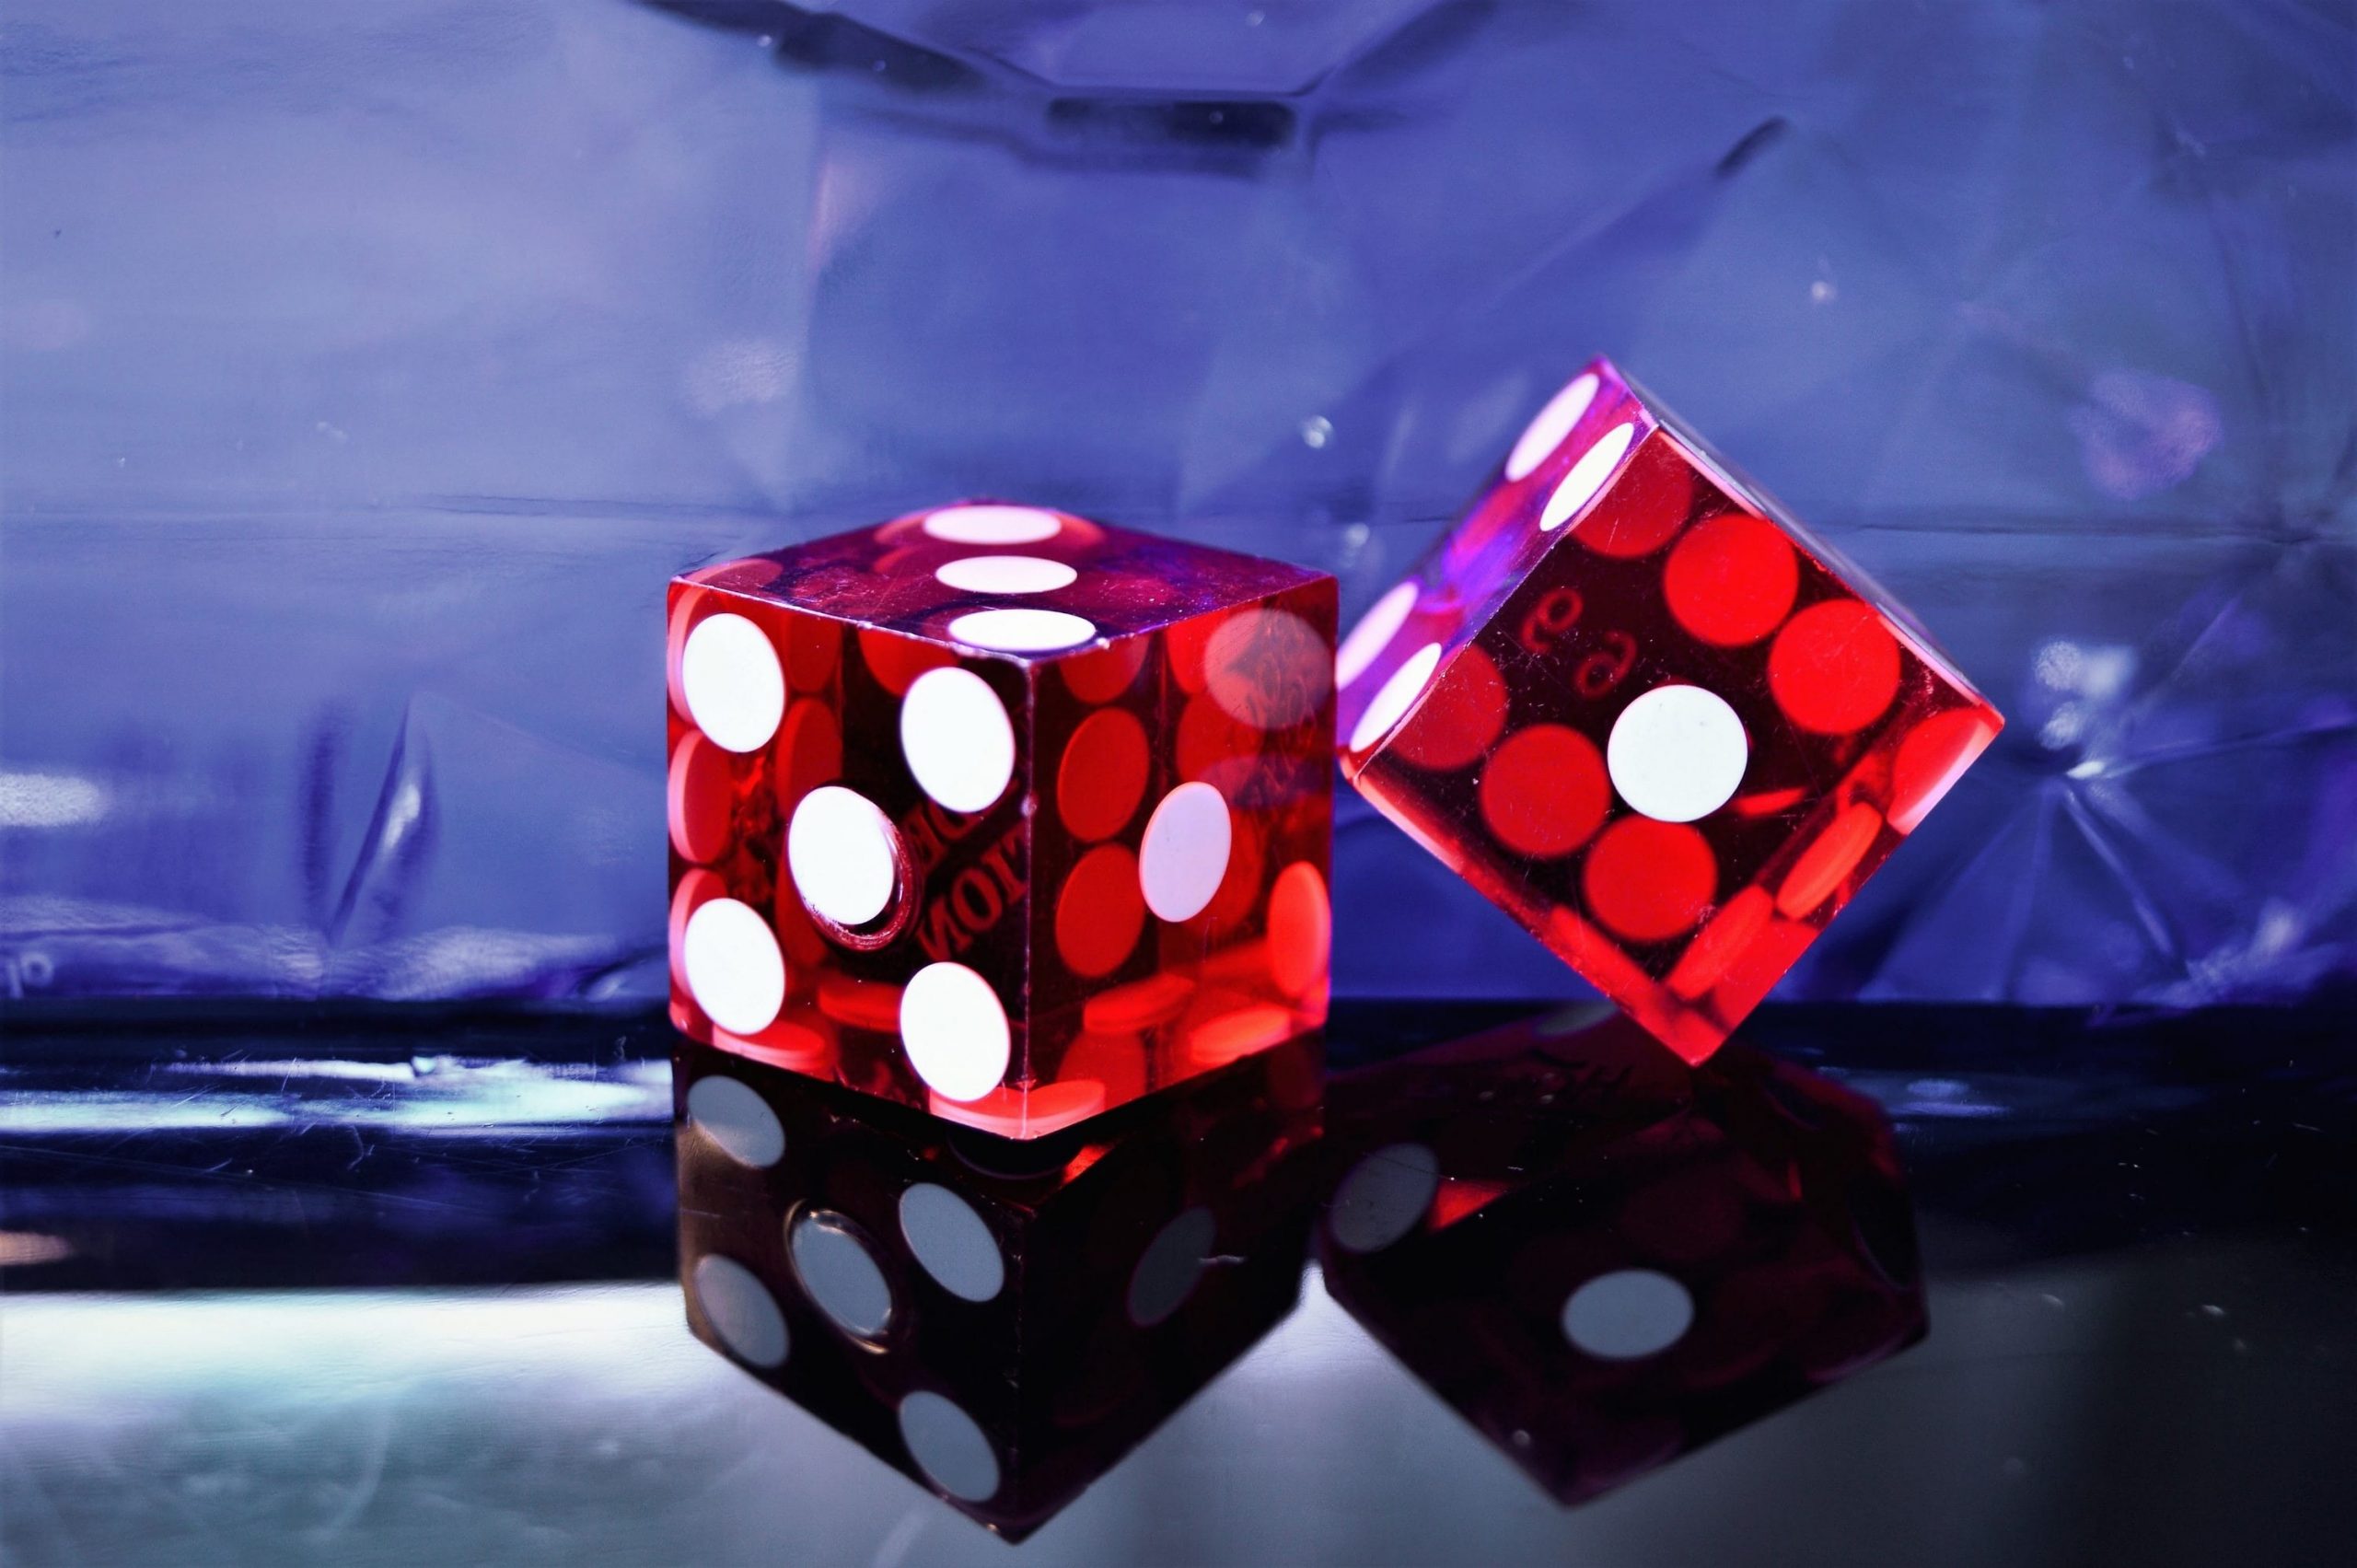 IF YOU’RE DUE FOR A WIN, FREE ONLINE CASINO GAMES ARE FOR YOU!